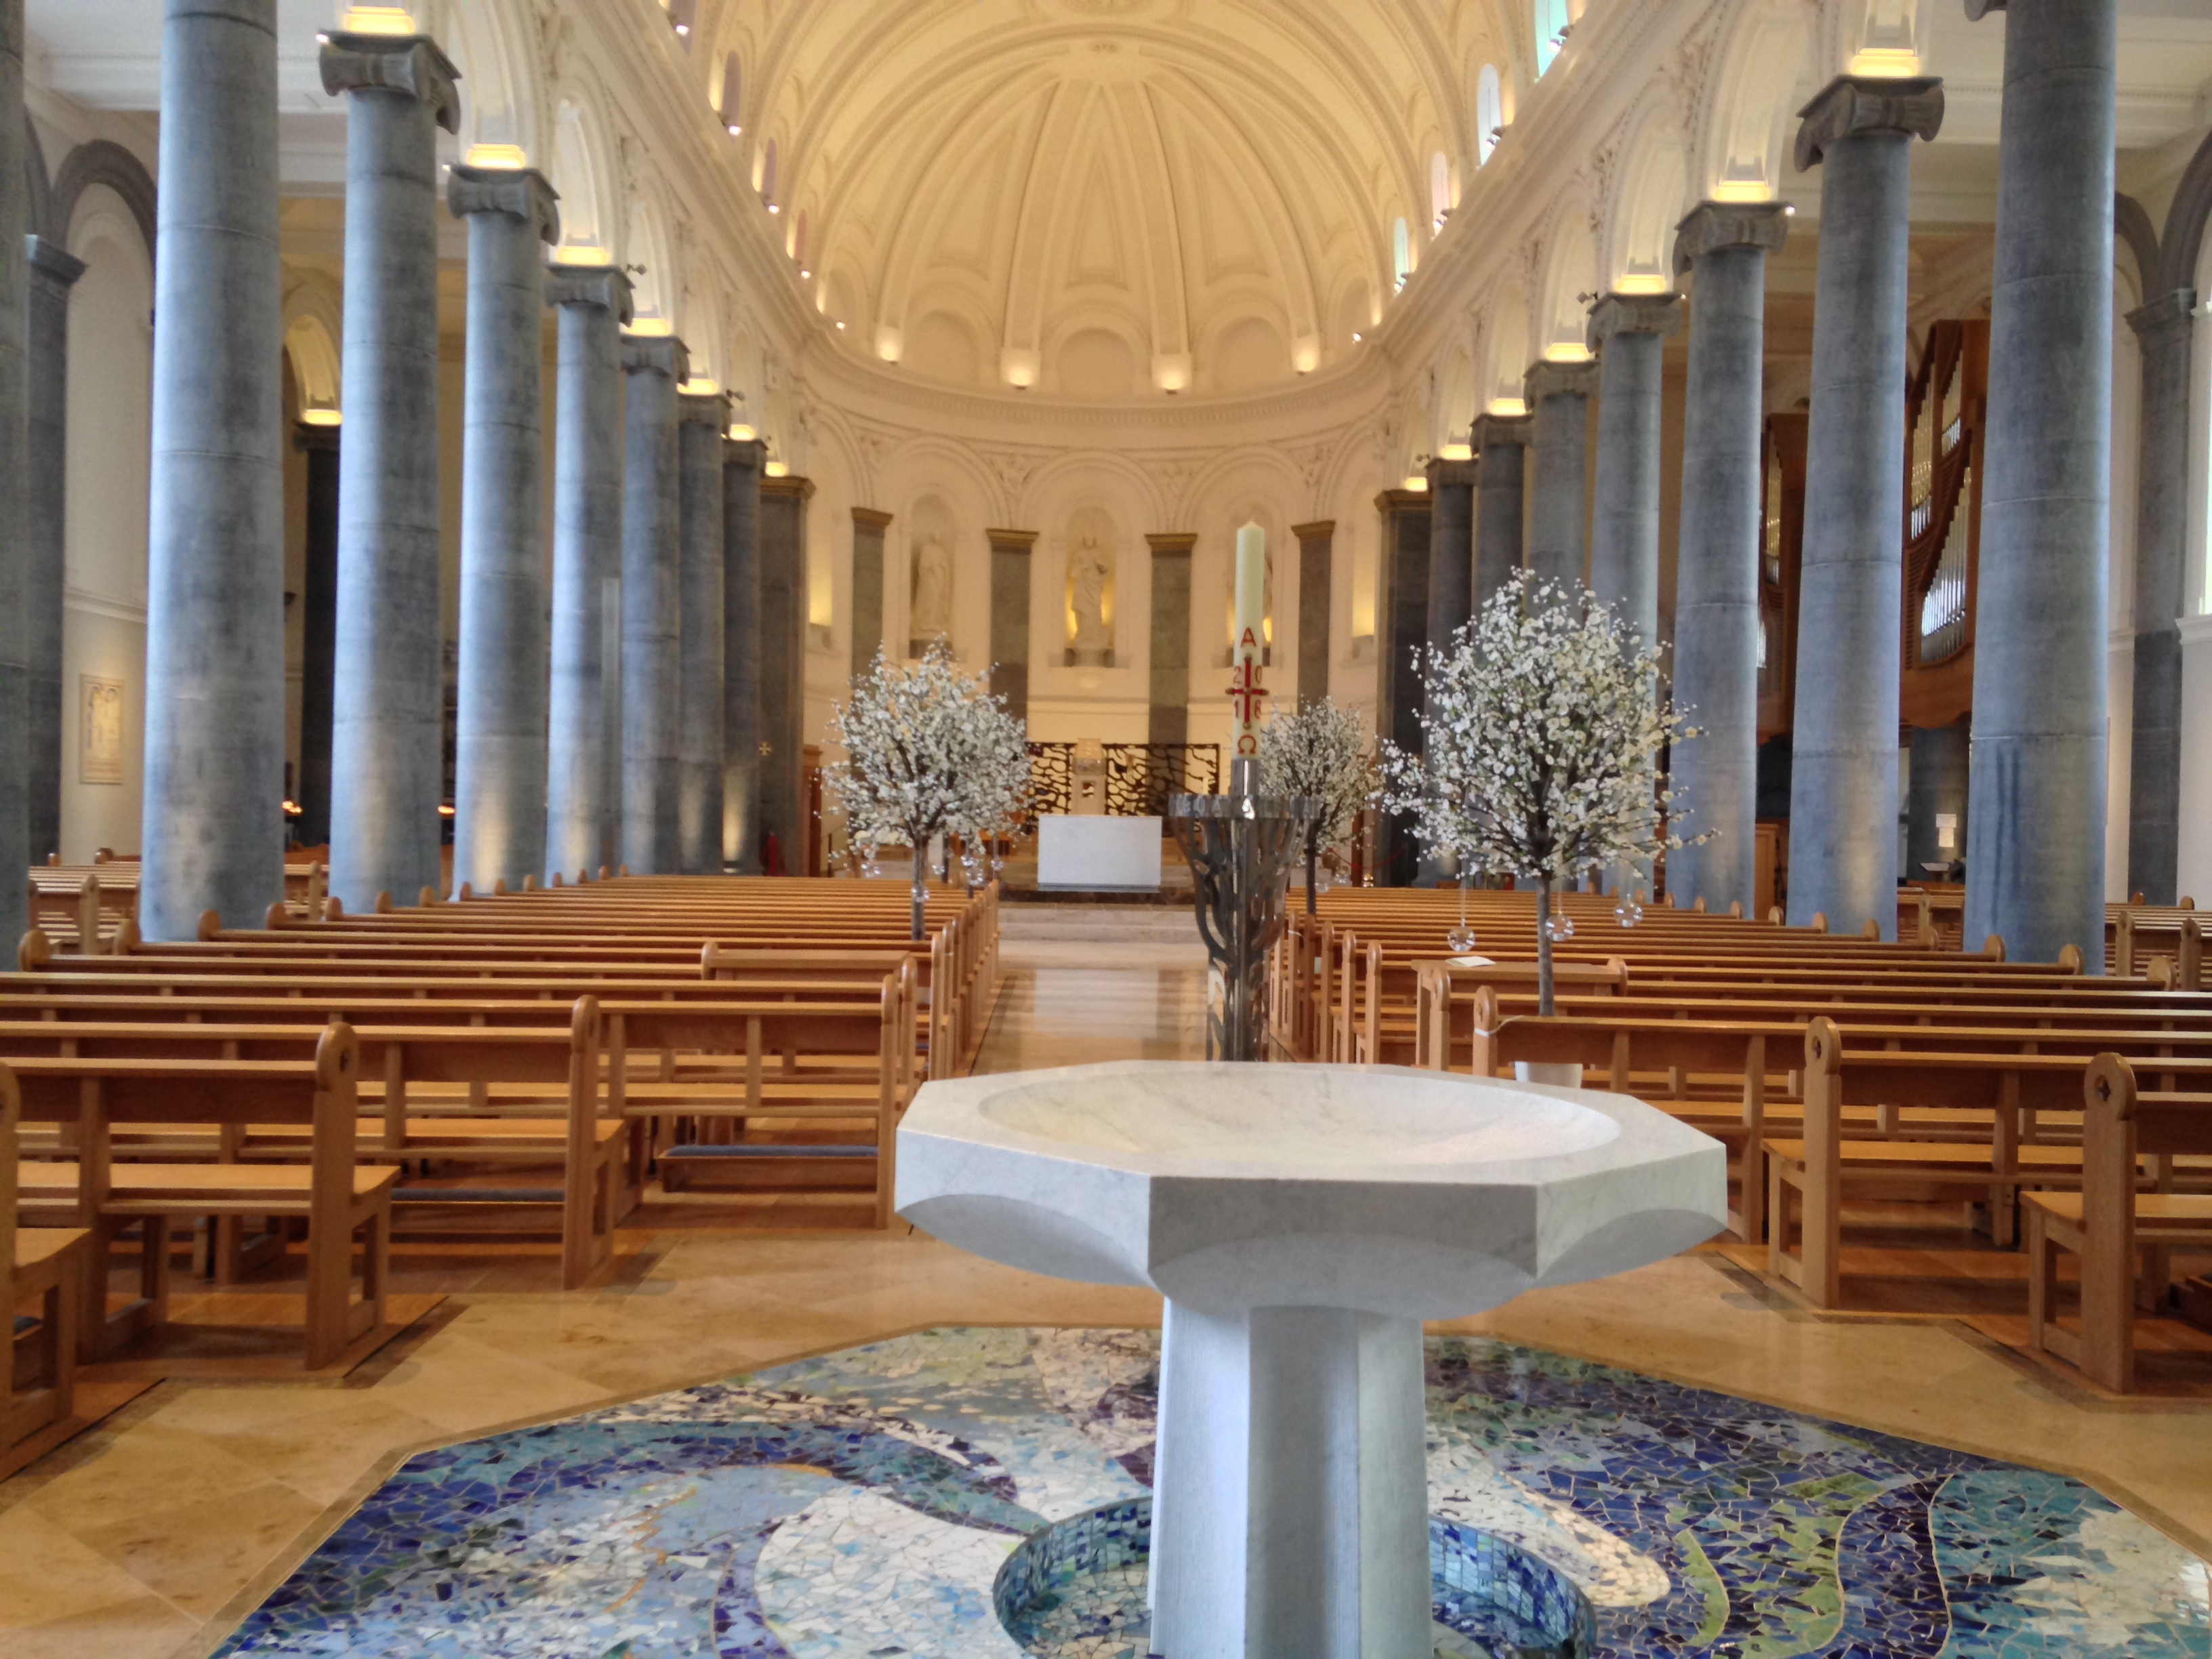 Inside St. Mel's cathedral in Longford. Photo by Sara Burrus.